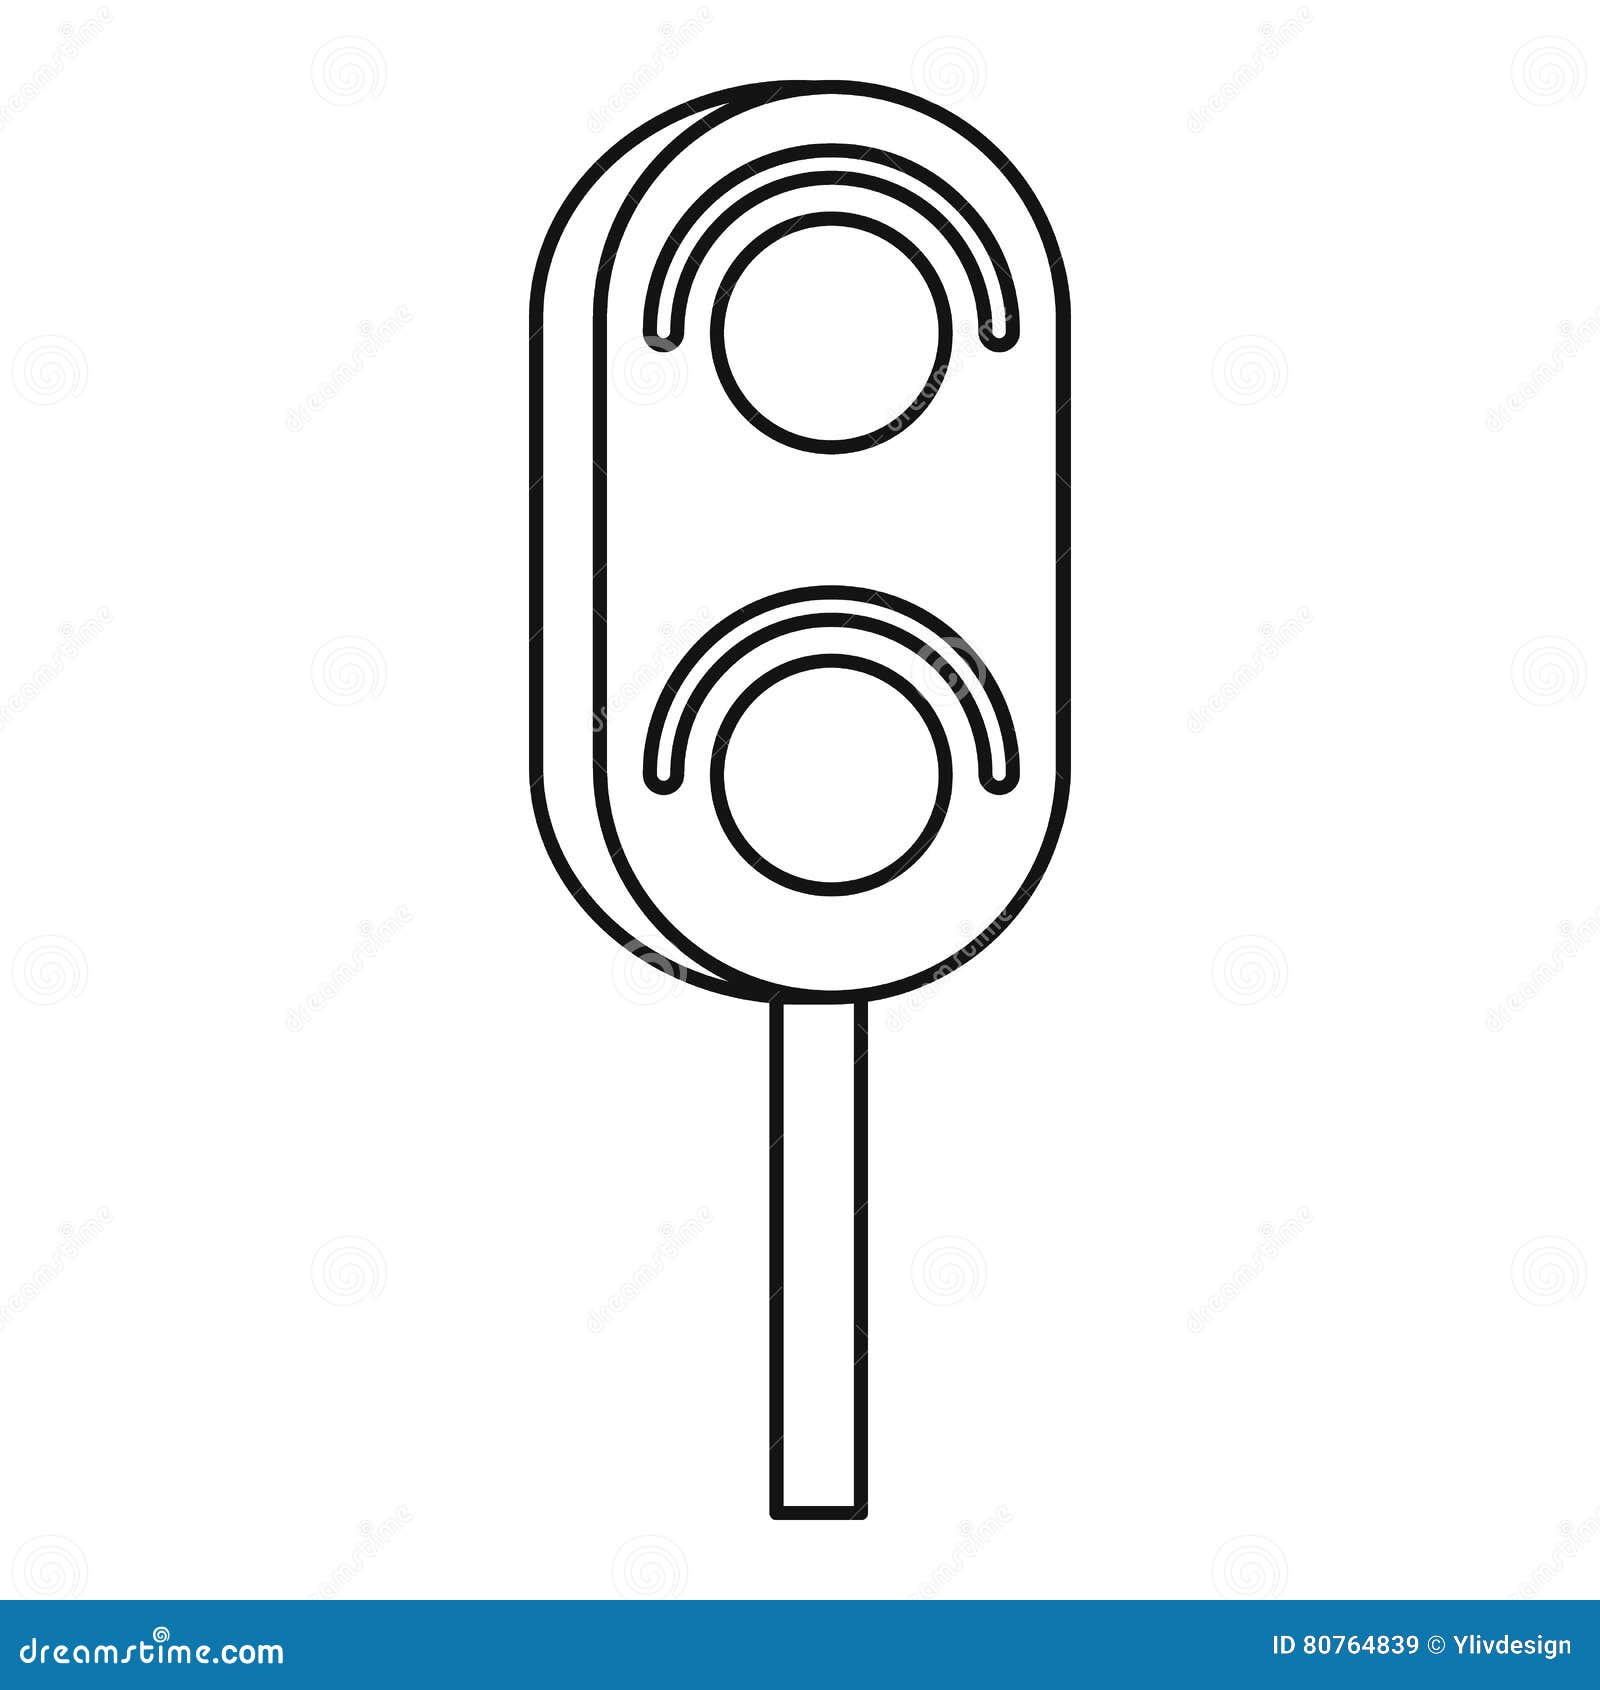 semaphore trafficlight icon, outline style